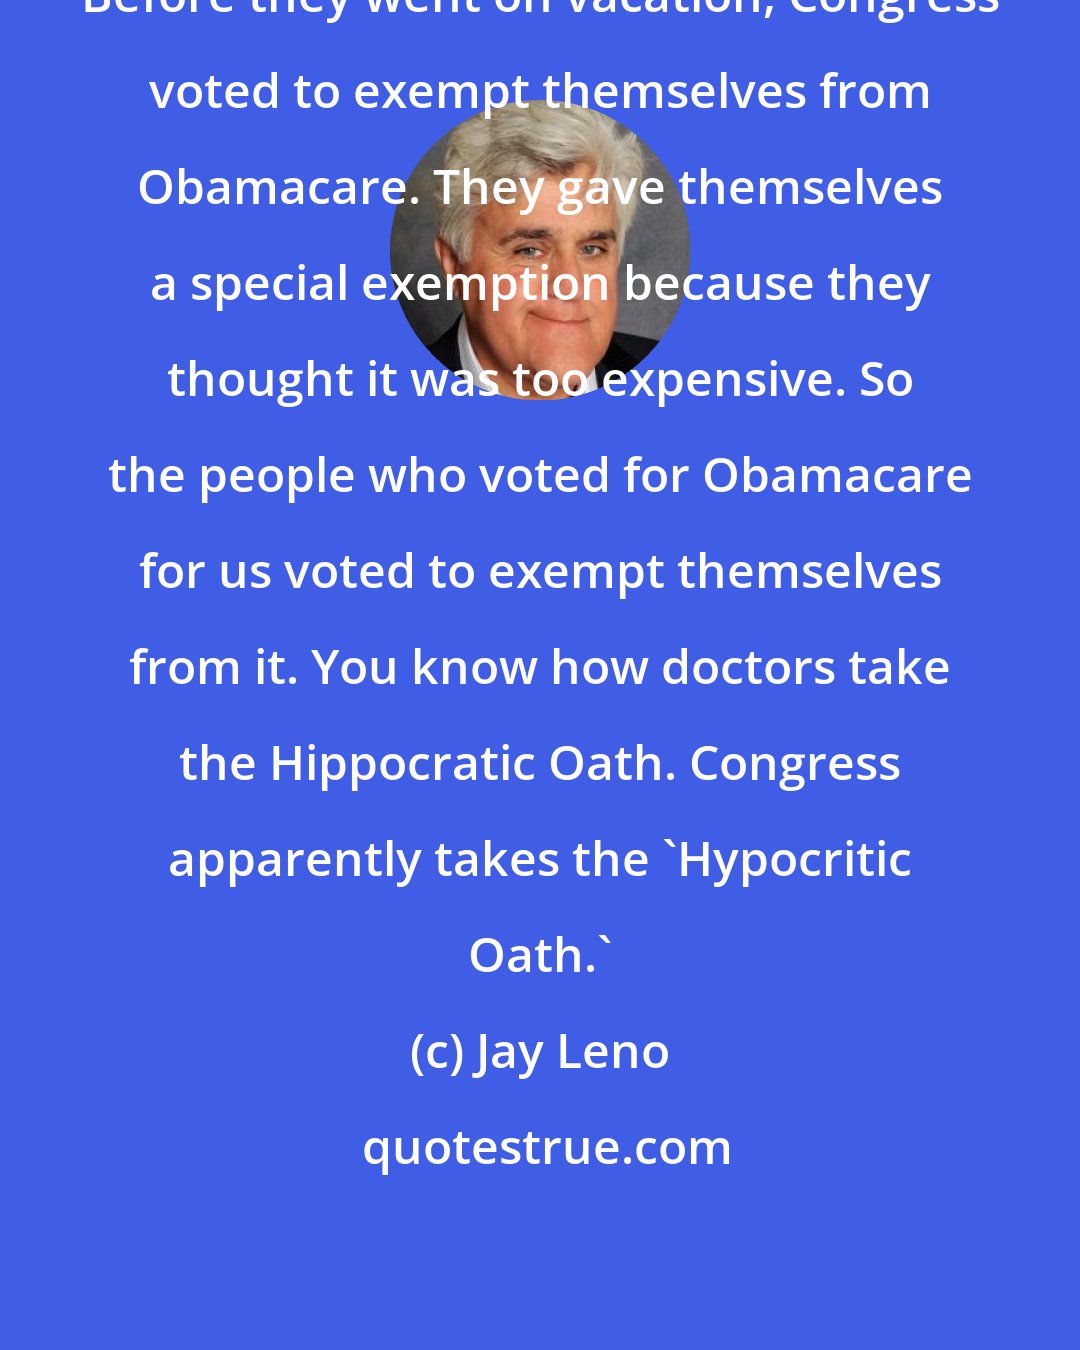 Jay Leno: Before they went on vacation, Congress voted to exempt themselves from Obamacare. They gave themselves a special exemption because they thought it was too expensive. So the people who voted for Obamacare for us voted to exempt themselves from it. You know how doctors take the Hippocratic Oath. Congress apparently takes the 'Hypocritic Oath.'